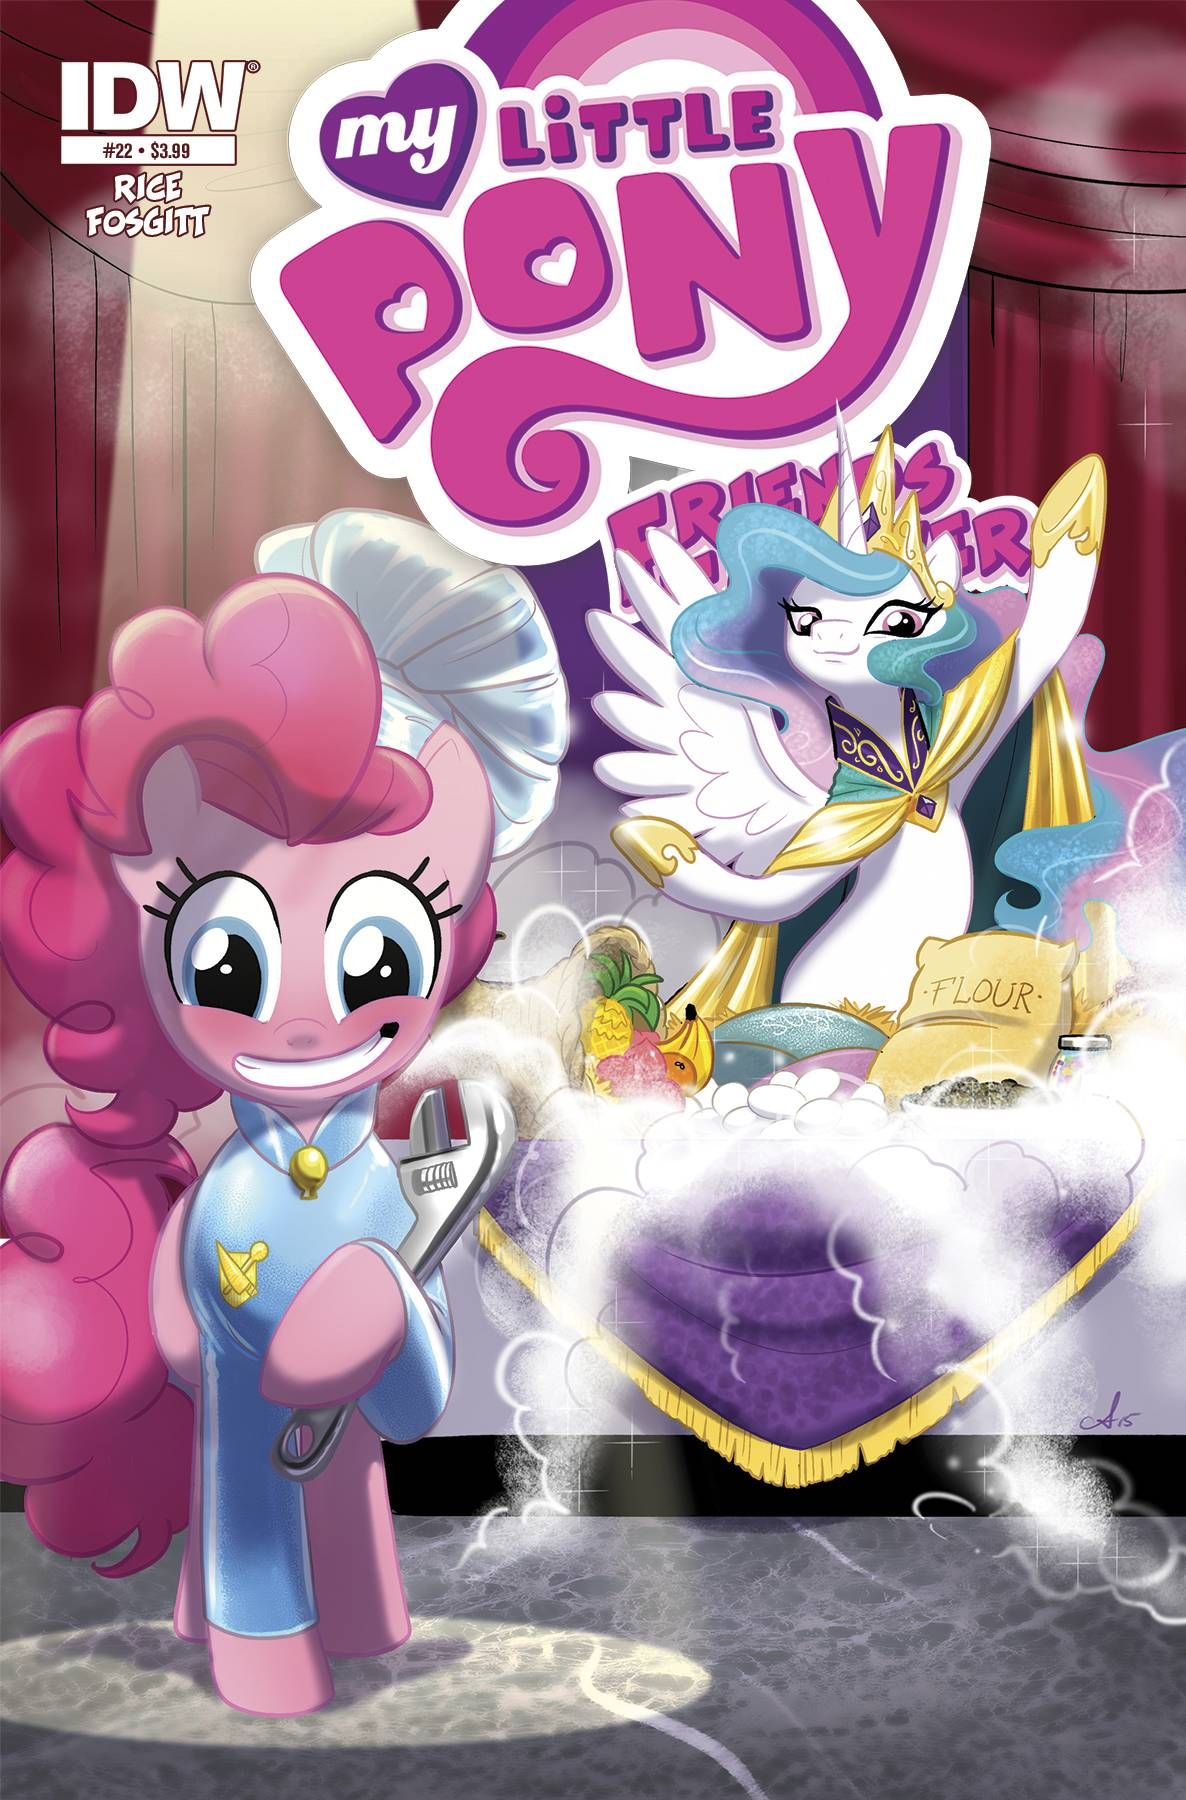 My Little Pony Friends Forever #22 Comic